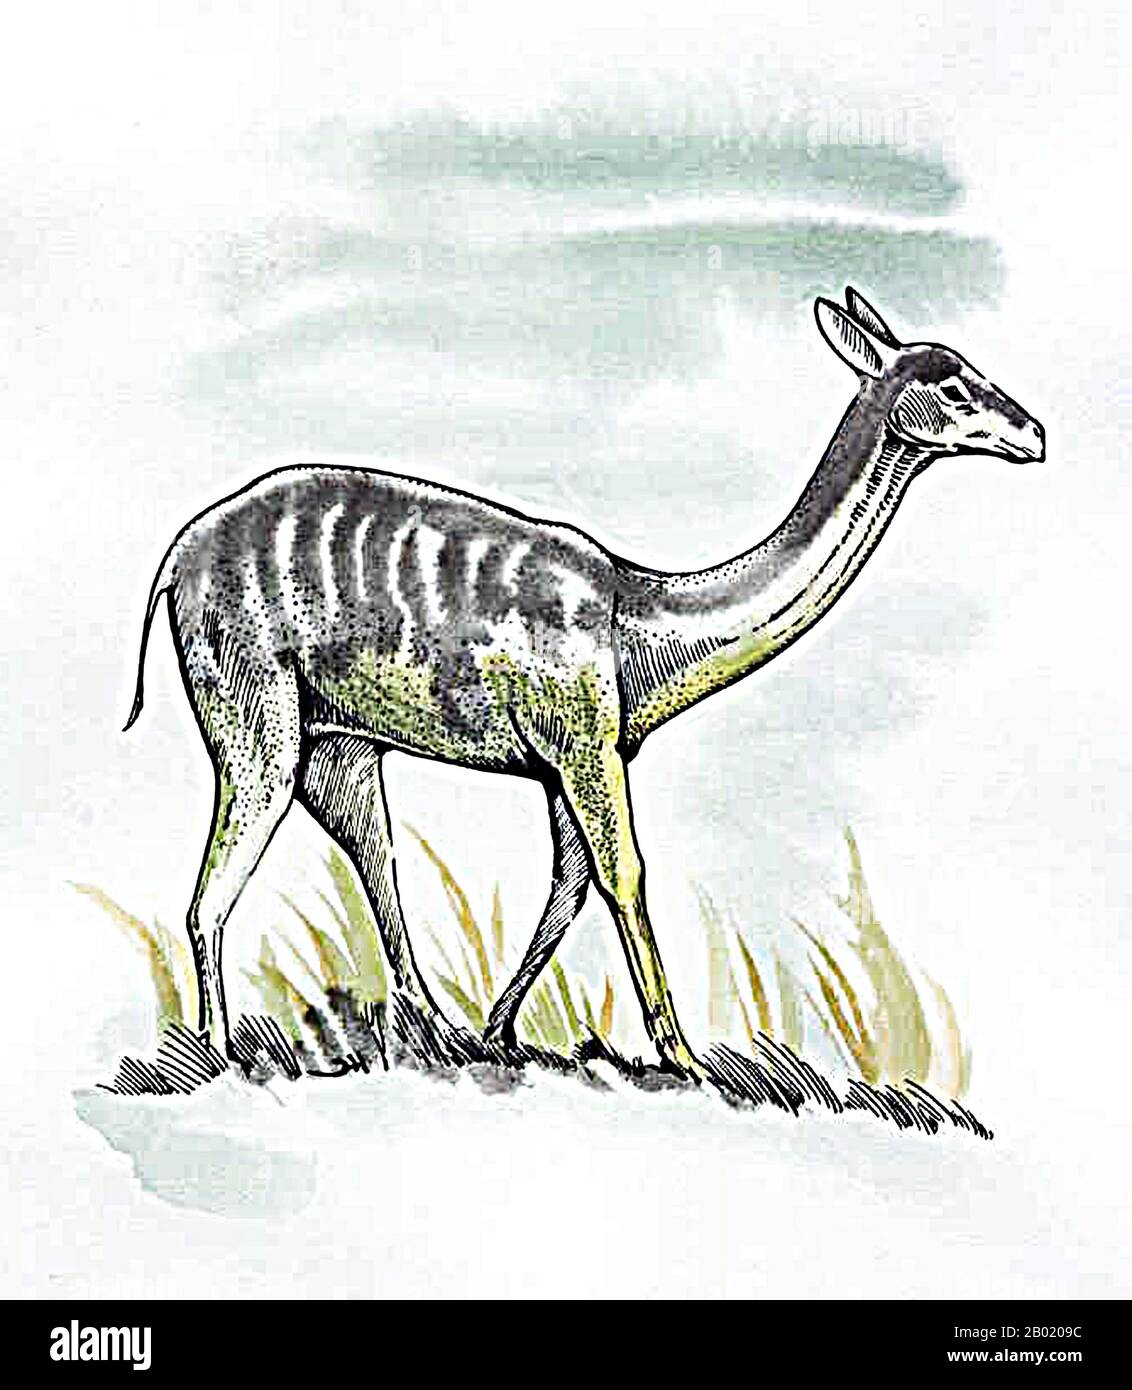 Procamelus had long legs designed for speed, and was about 1.3 metres (4.3 ft) in height, slightly smaller than a modern llama. Unlike modern camelids, it had a pair of small incisor teeth in the upper jaw. The remaining teeth were large and adapted for eating tough vegetation. The shape of the toes suggests that it possessed foot pads, like modern camels, but unlike earlier forms of camelid, which generally had hooves. This would have helped it walk over relatively soft ground. Stock Photo